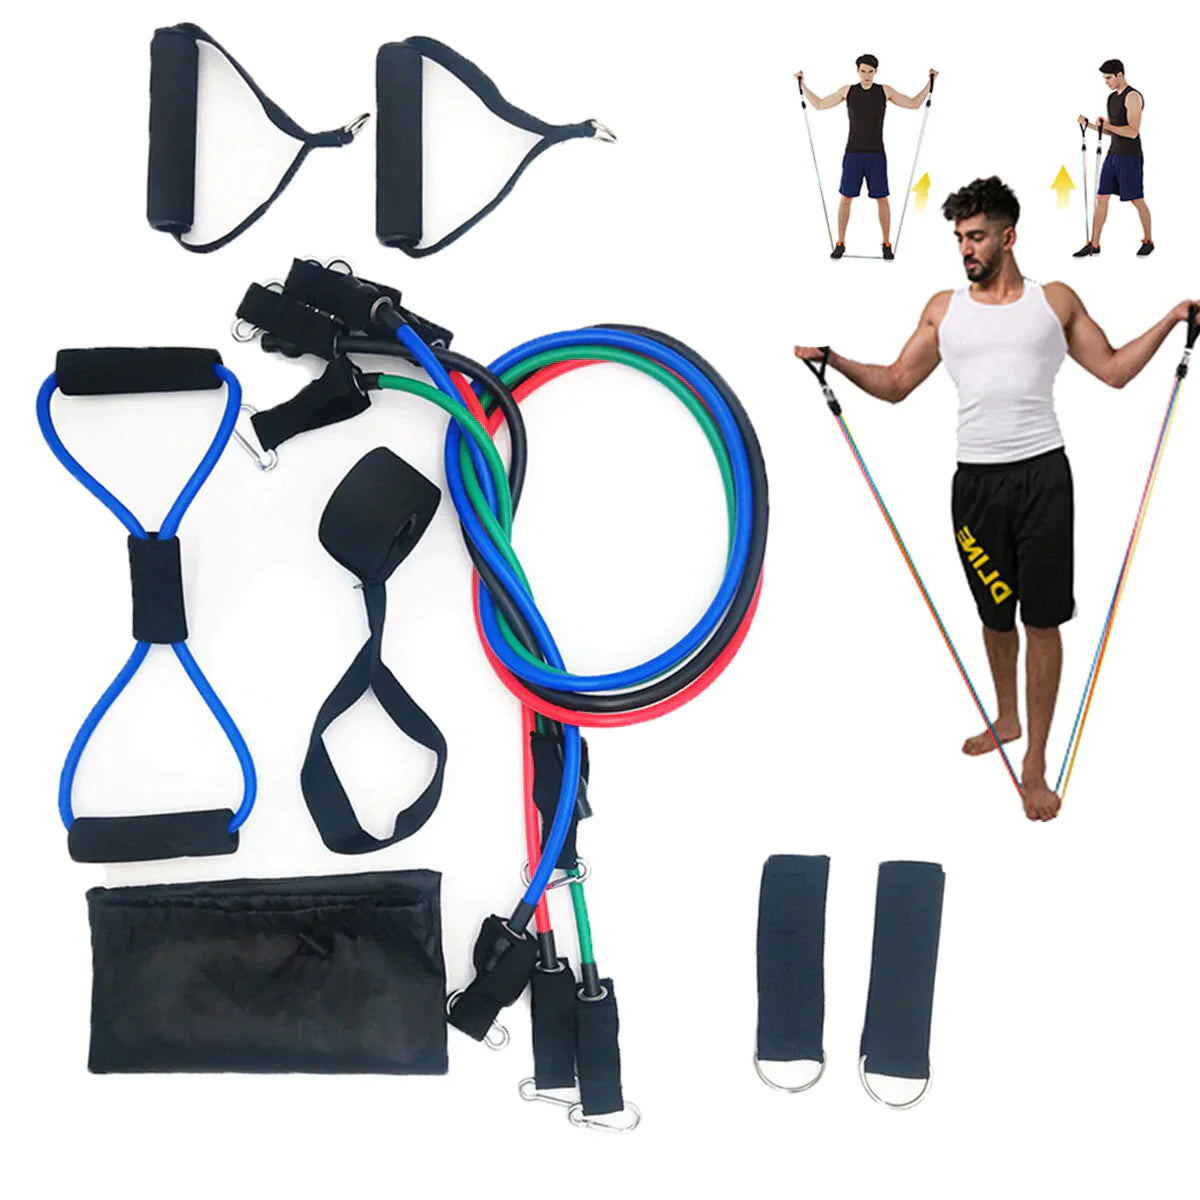 11pc Home Workout Resistance Bands Set with Door Anchor Handles and Ankle Straps Muscle Training Equipment